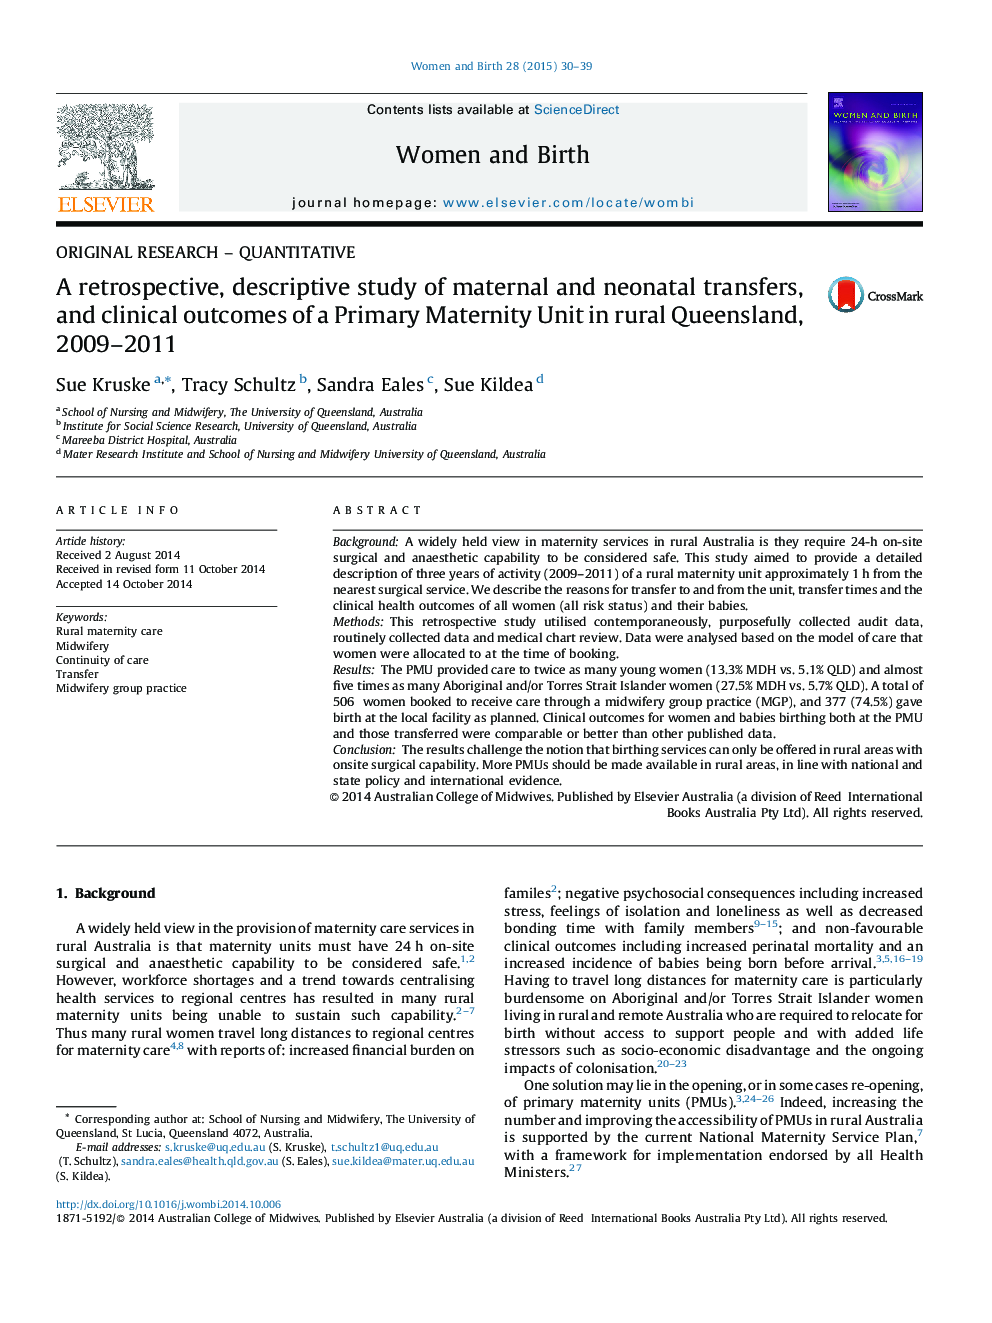 A retrospective, descriptive study of maternal and neonatal transfers, and clinical outcomes of a Primary Maternity Unit in rural Queensland, 2009–2011